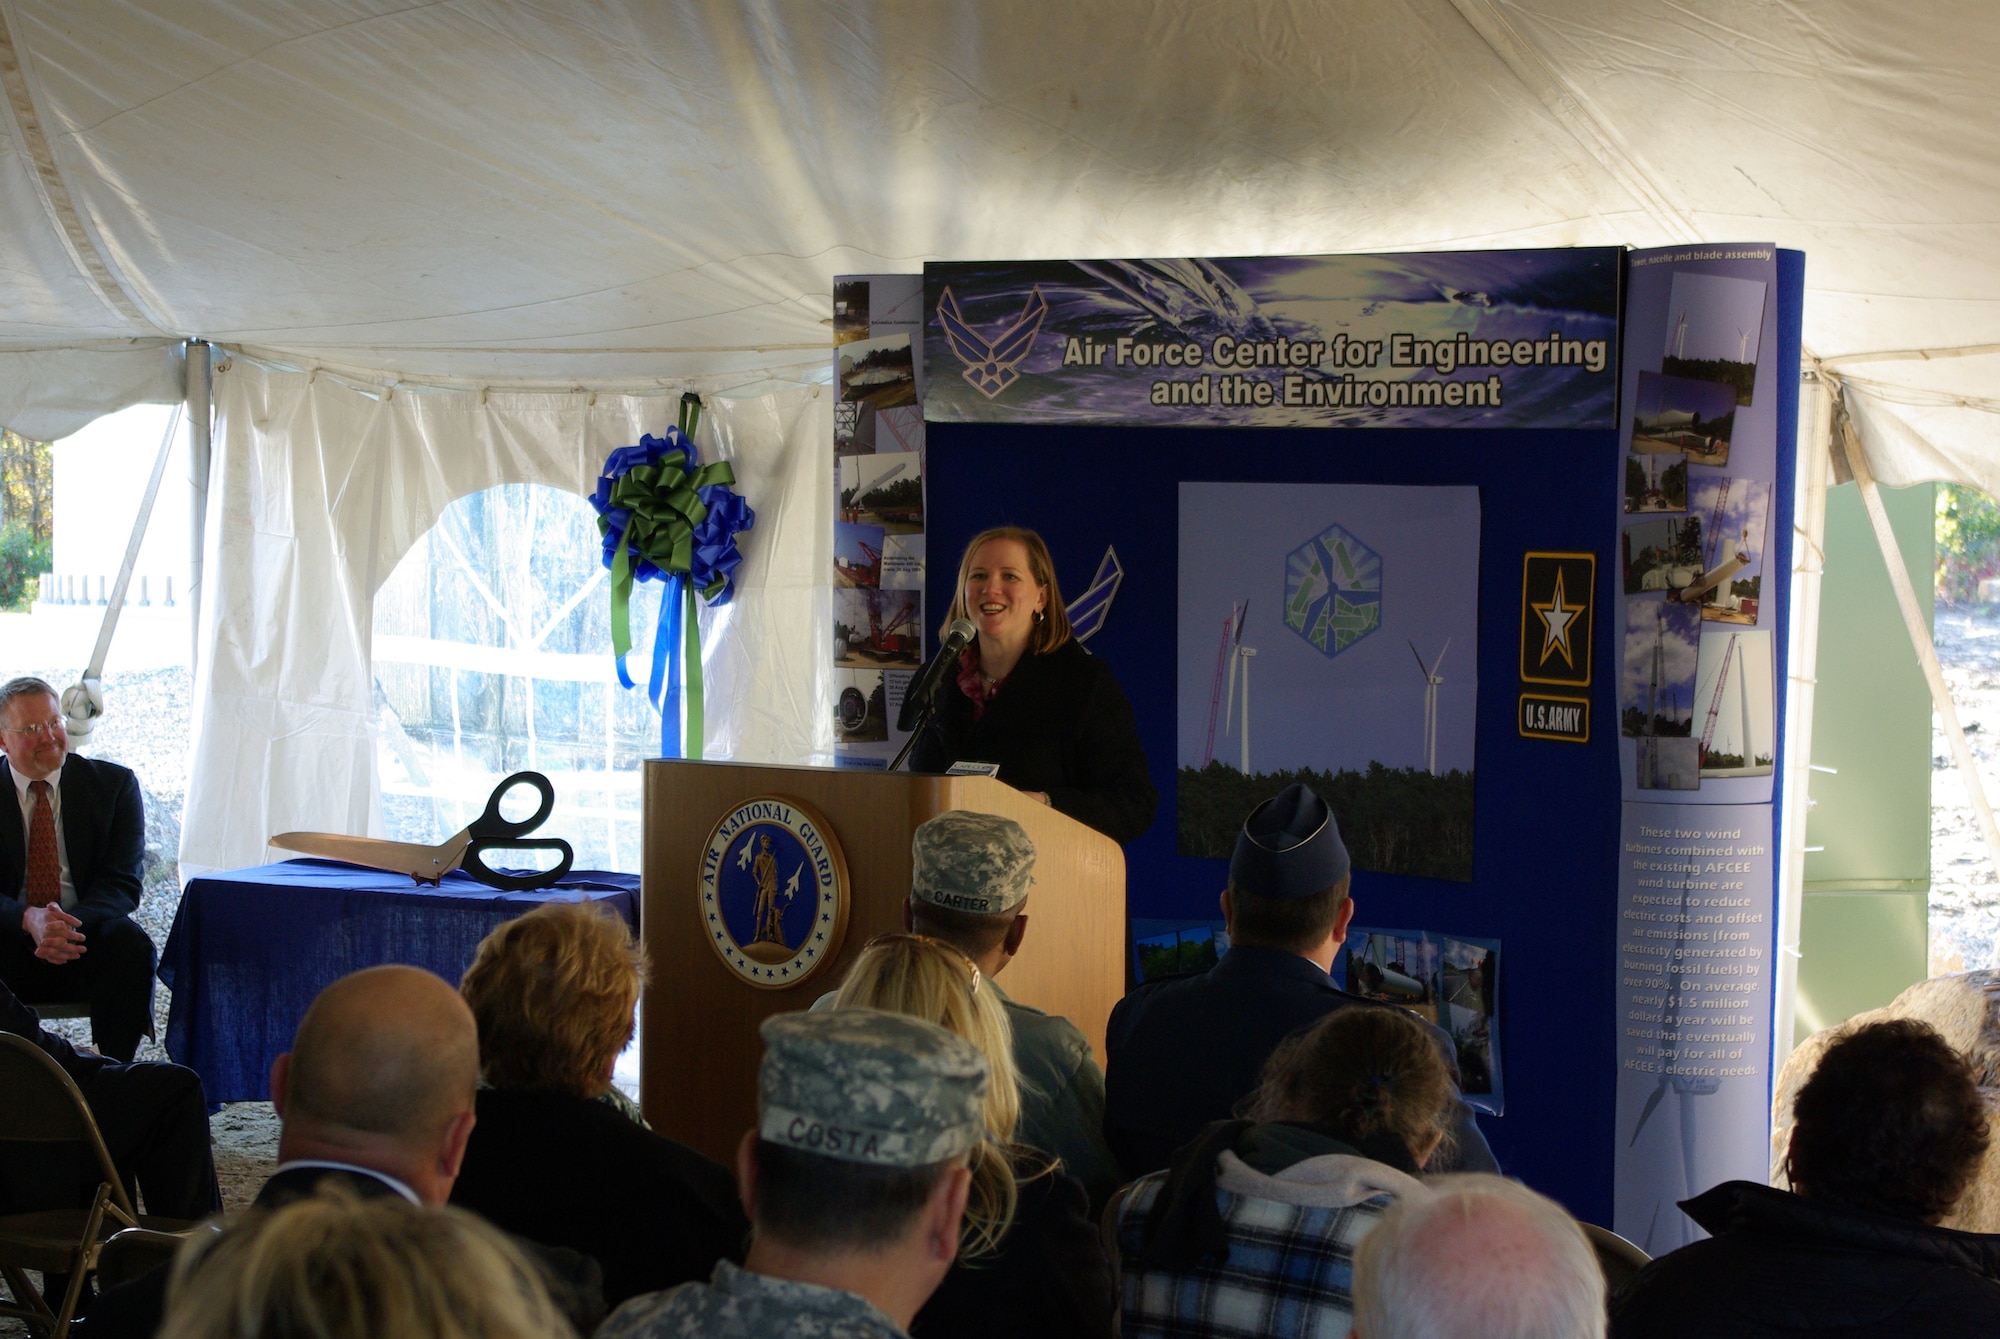 Under secretary of the Air Force Erin Conaton speaks at a ribbon cutting ceremony for two new Air Force wind turbines Oct. 28, 2011, at the Massachusetts Military Reservation in Cape Cod, Mass. The 1.5 megawatt wind turbines, in addition to an existing turbine, were built to offset electrical costs for powering numerous groundwater cleanup systems
at the reservation. The turbines will pay for all the Air Force's electric needs for groundwater remediation at MMR, saving more than $1.5 million per year. They will also offset emissions generated by fossil-fueled power plants, reducing the Air Force's carbon footprint. (U.S. Air Force photo/Scott Dehainaut)
